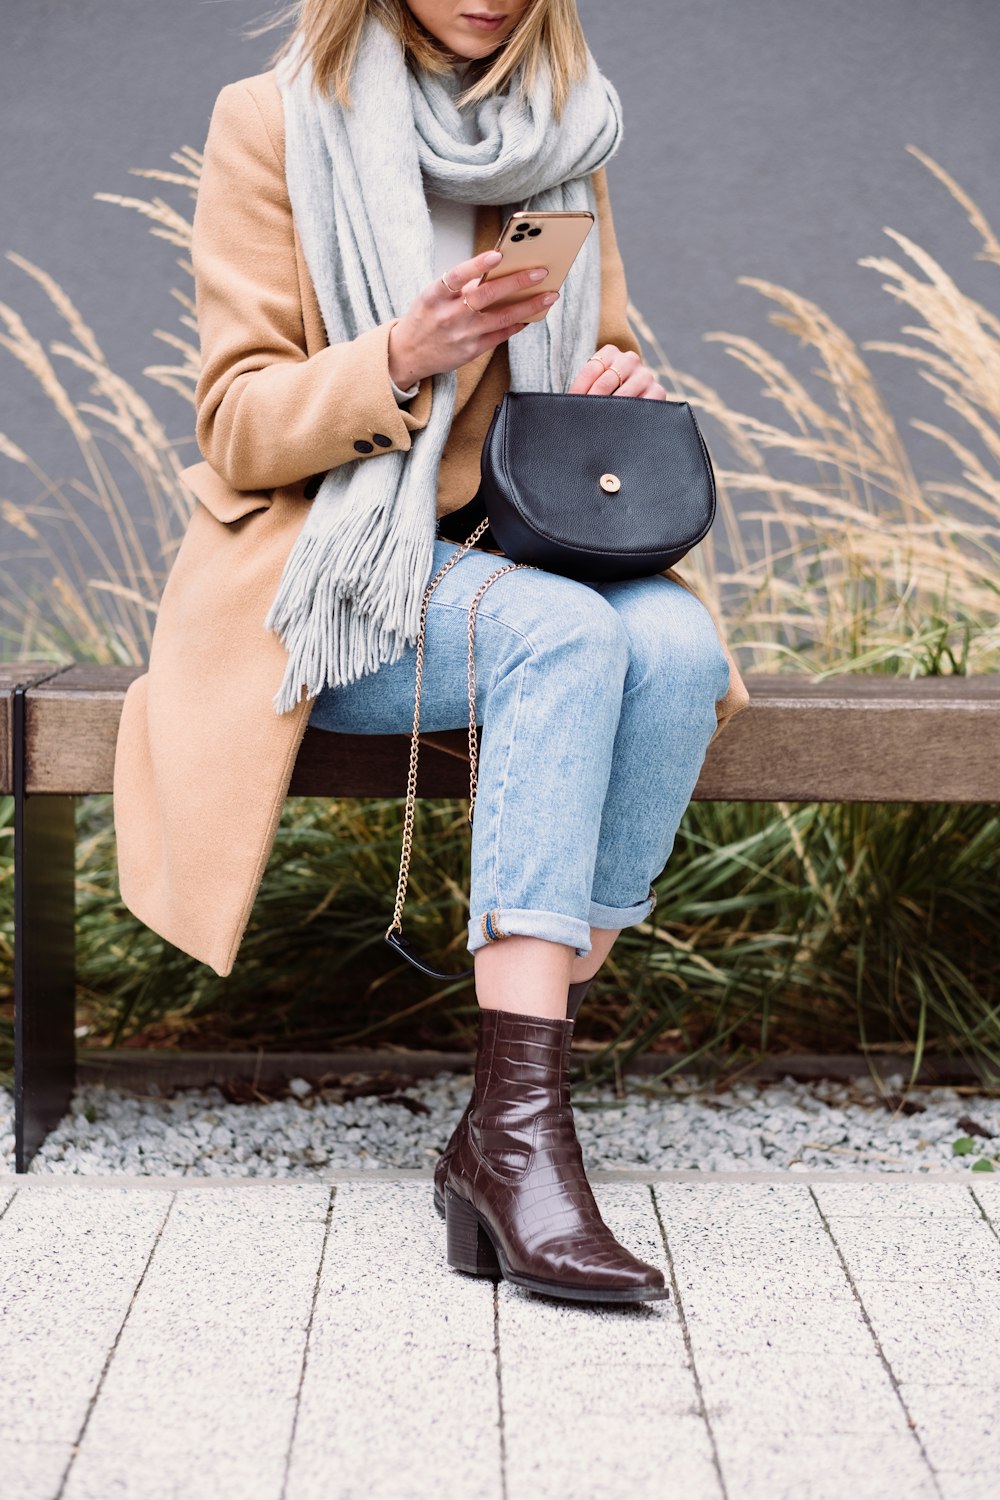 a woman sitting on a bench looking at her phone